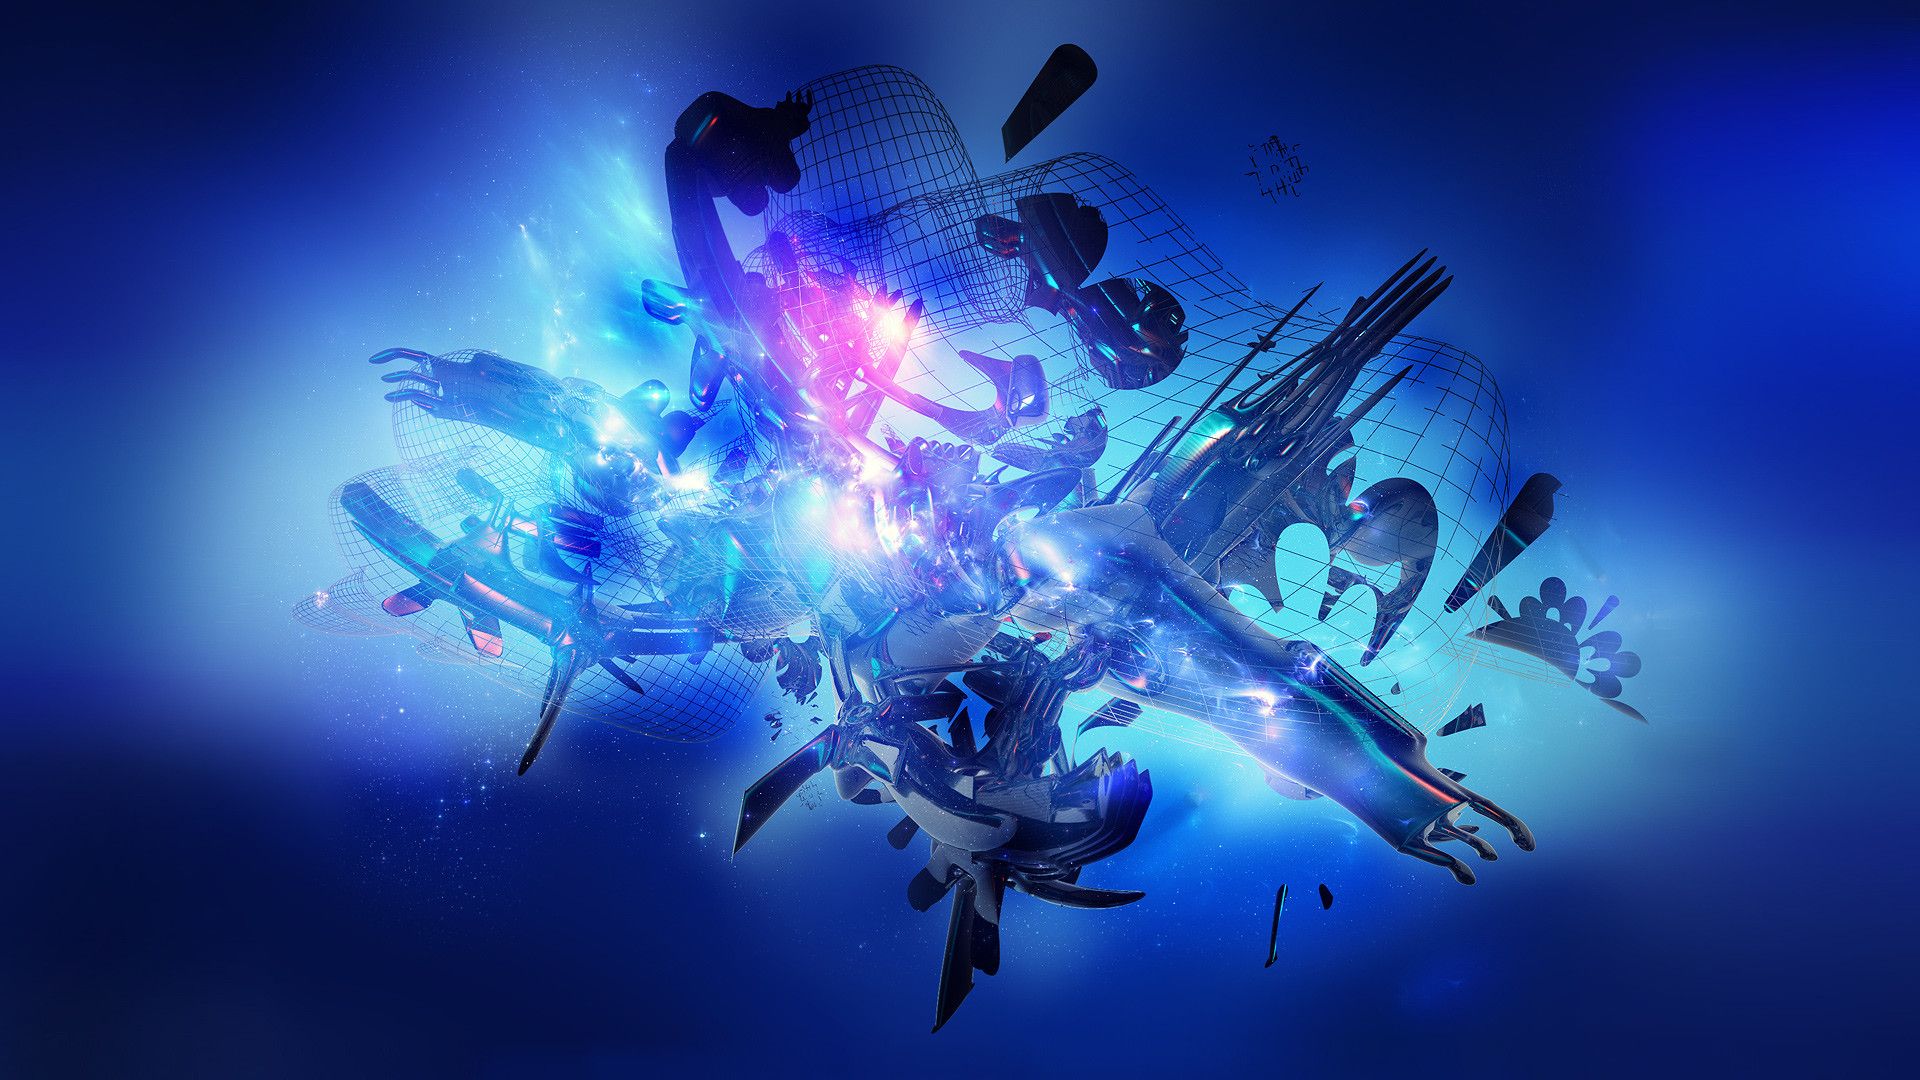 Abstract Gaming Wallpaper 1080P background picture